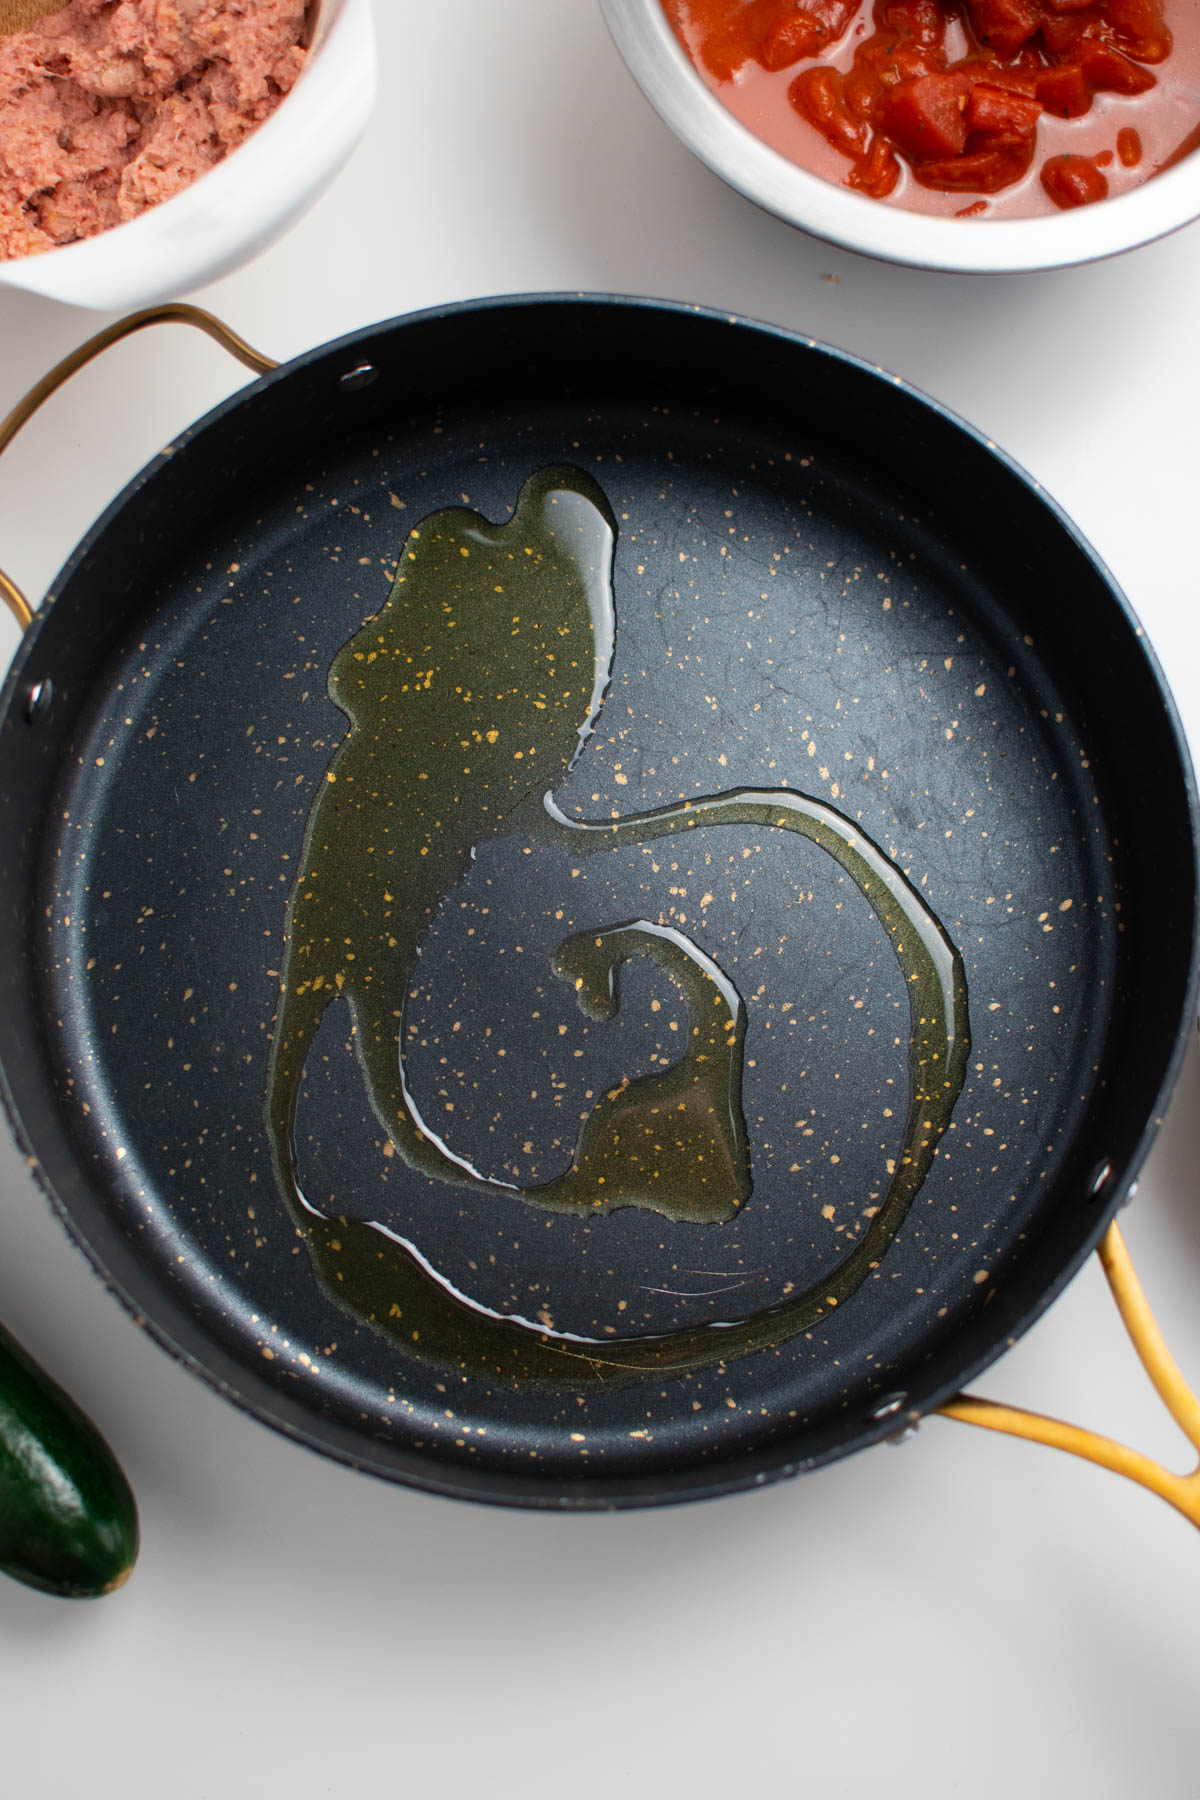 Swirl of olive oil in large black speckled skillet, with bowls of other ingredients nearby.